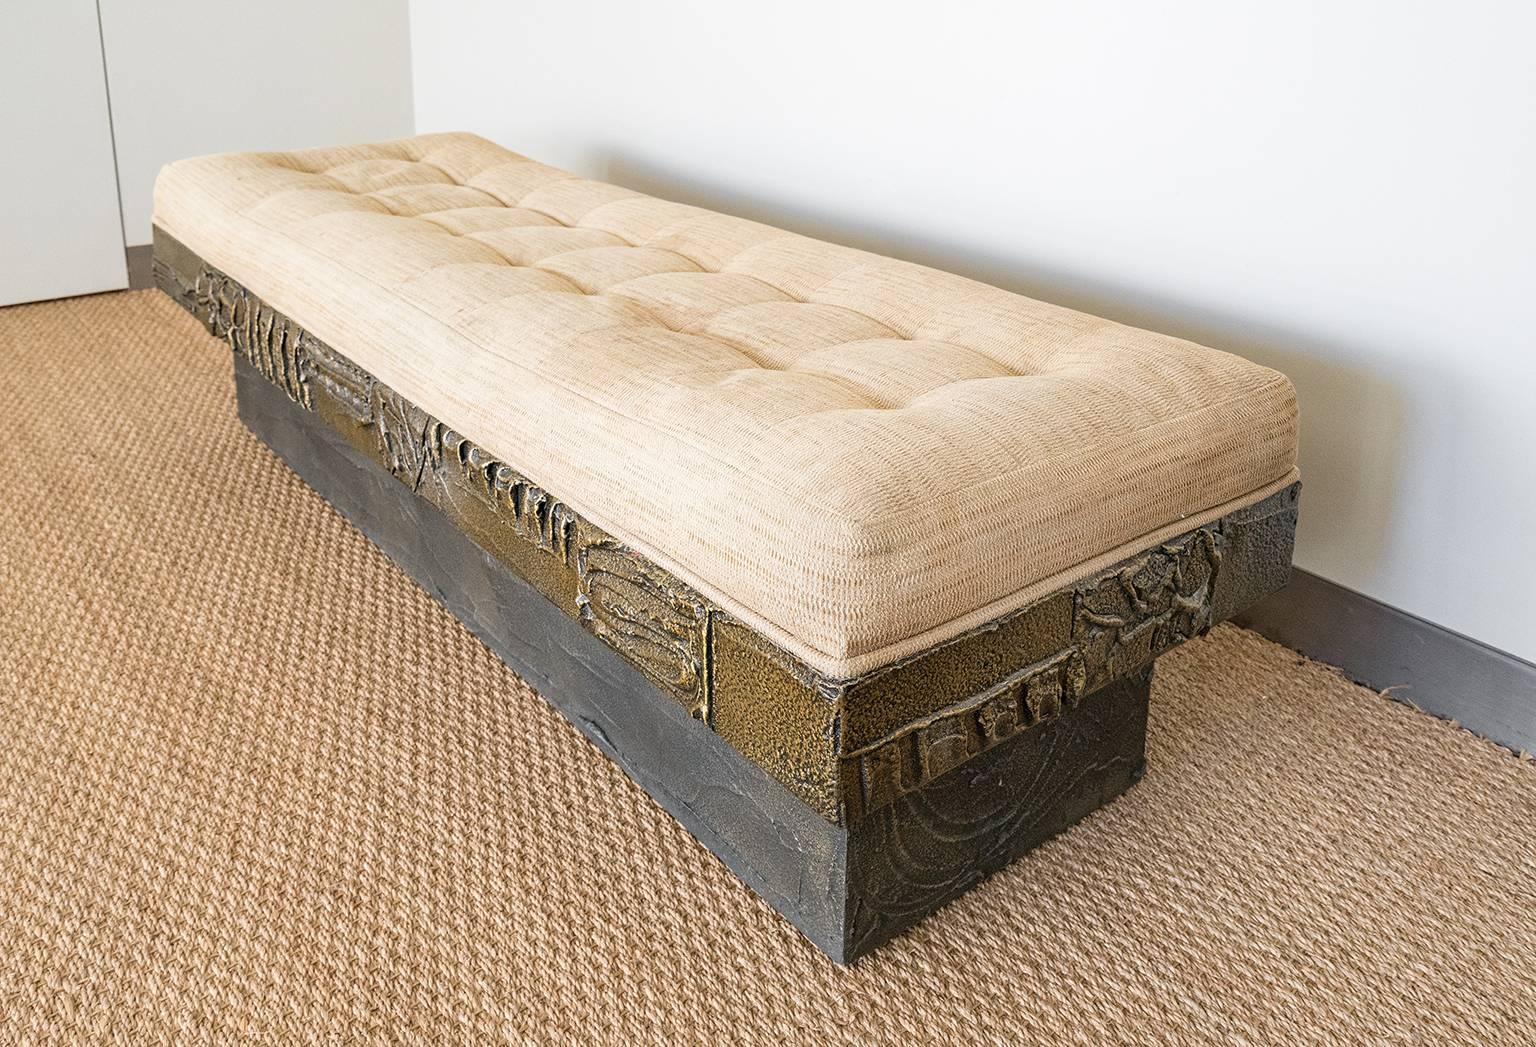 Beautifully sculpted bronzed epoxy resin bench by Paul Evans. 
The bench is in great condition, upholstery is original and somewhat faded.
Interior foam has lost it's integrity in some sections. We recommend reupholstery.